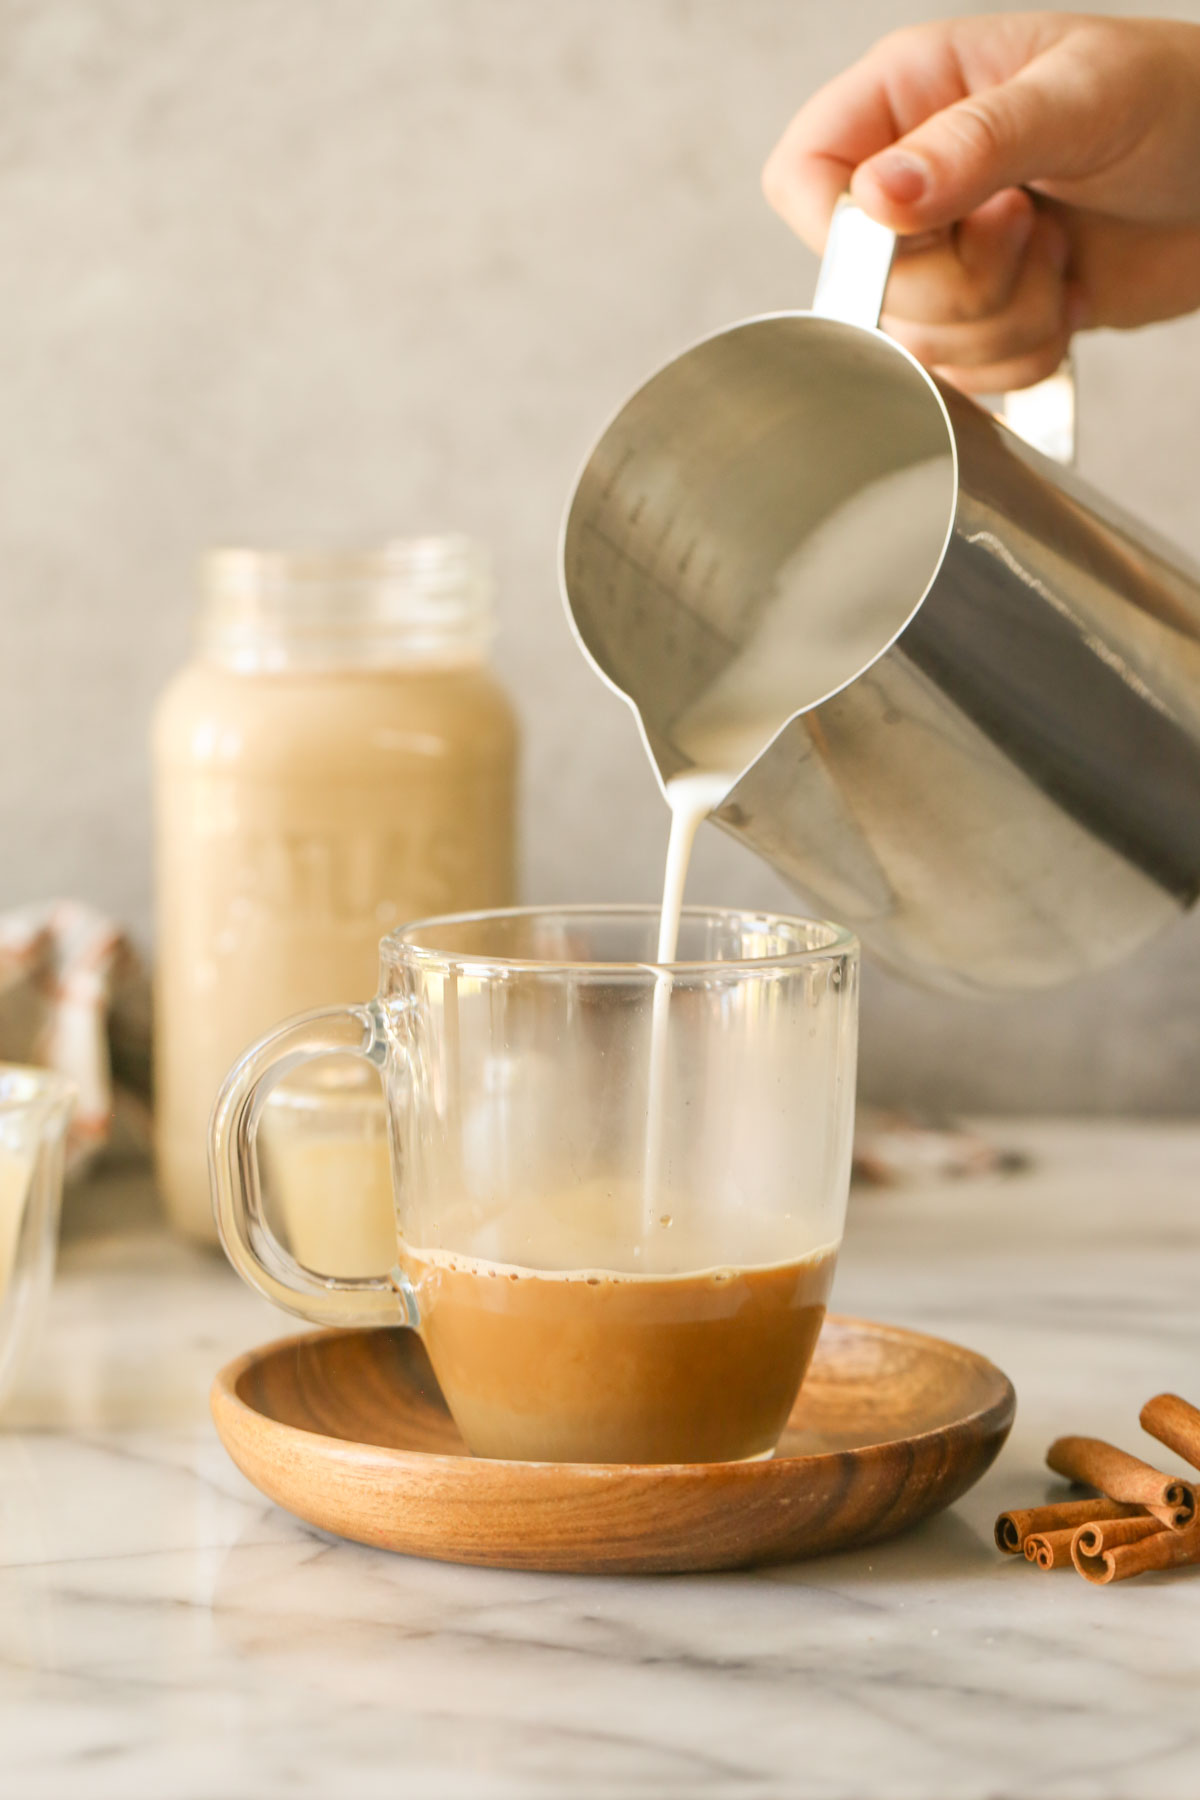 A hand pouring steamed milk from a stainless steel pitcher into a glass mug with espresso in it, sitting on a wood saucer with cinnamon sticks next to it, with a glass jar of Brown Sugar and Cinnamon Coffee Creamer in the background.  